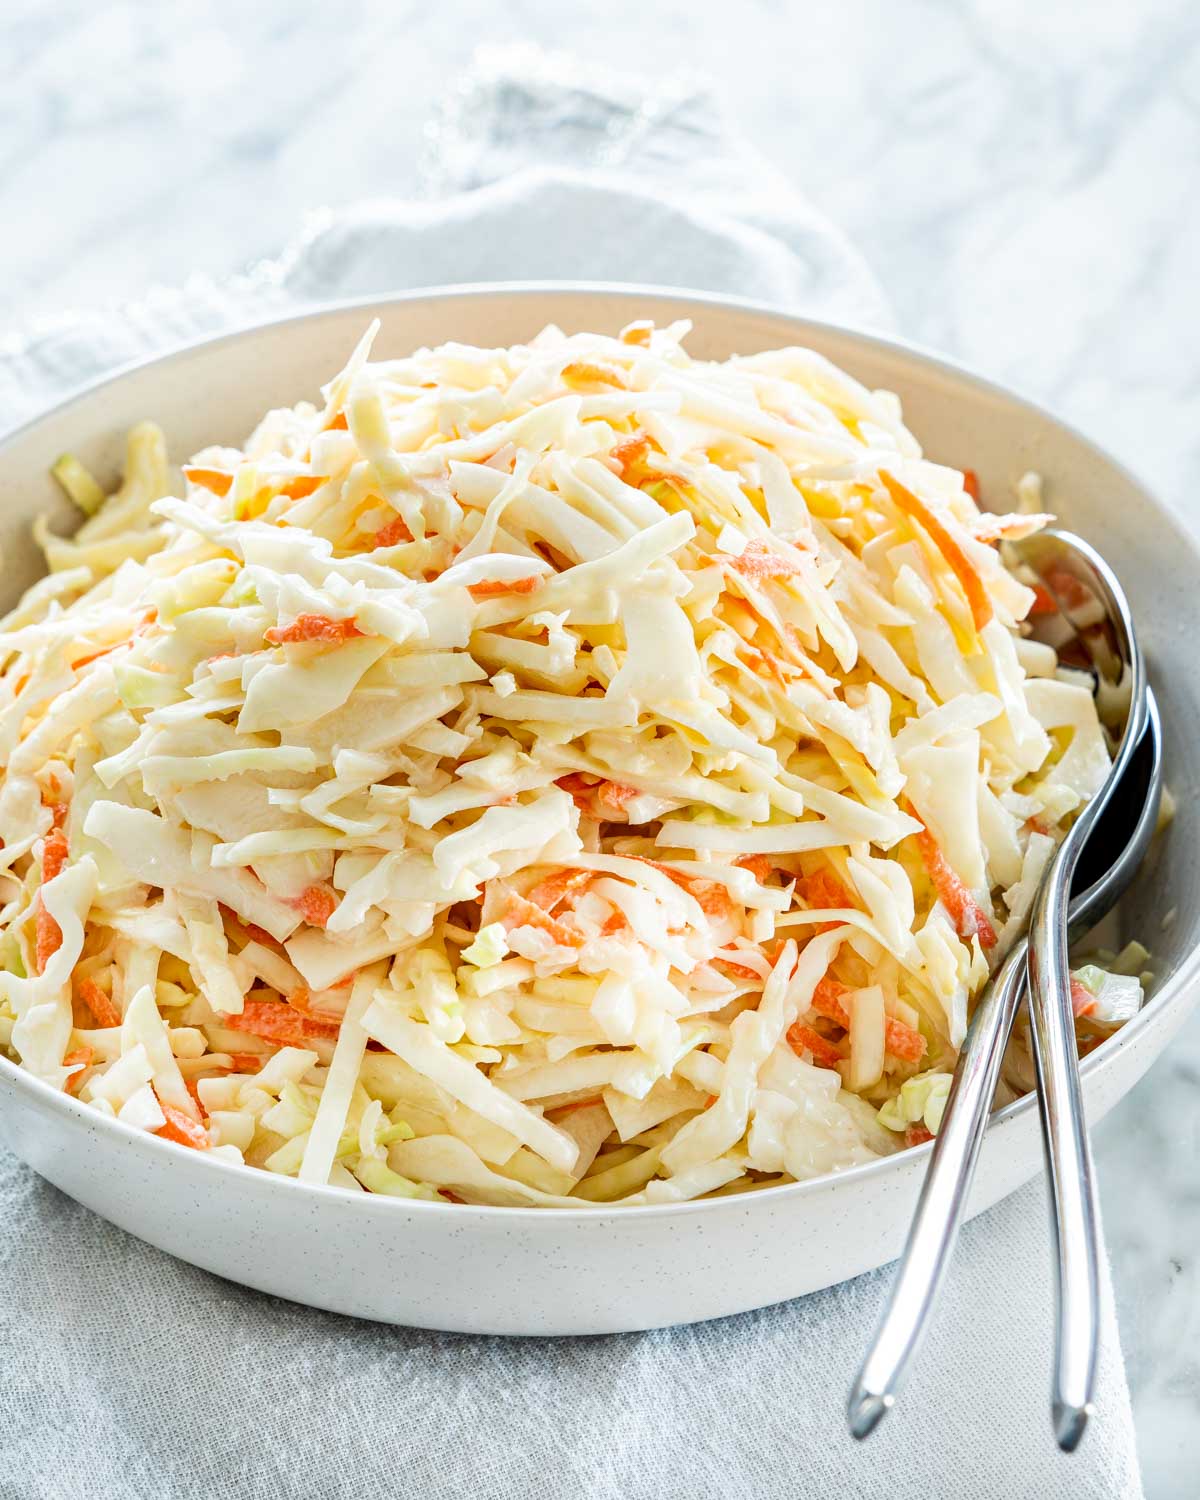 a bowl with coleslaw in it and two serving spoons